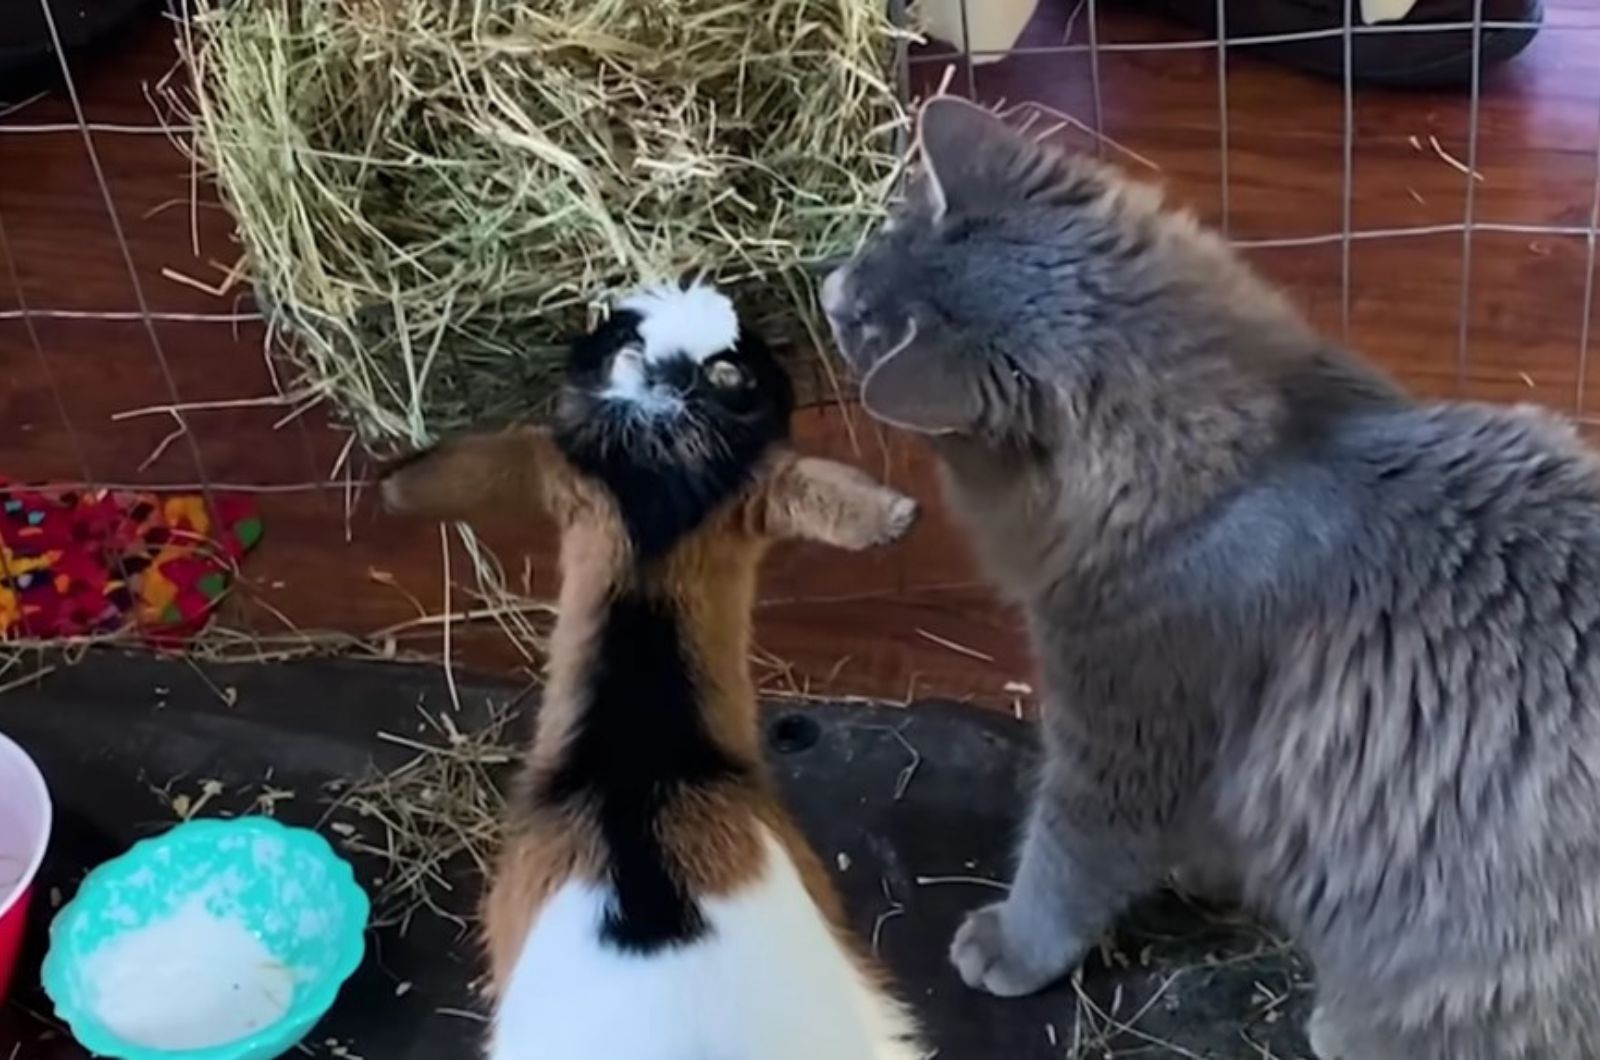 cat looking at goat eating